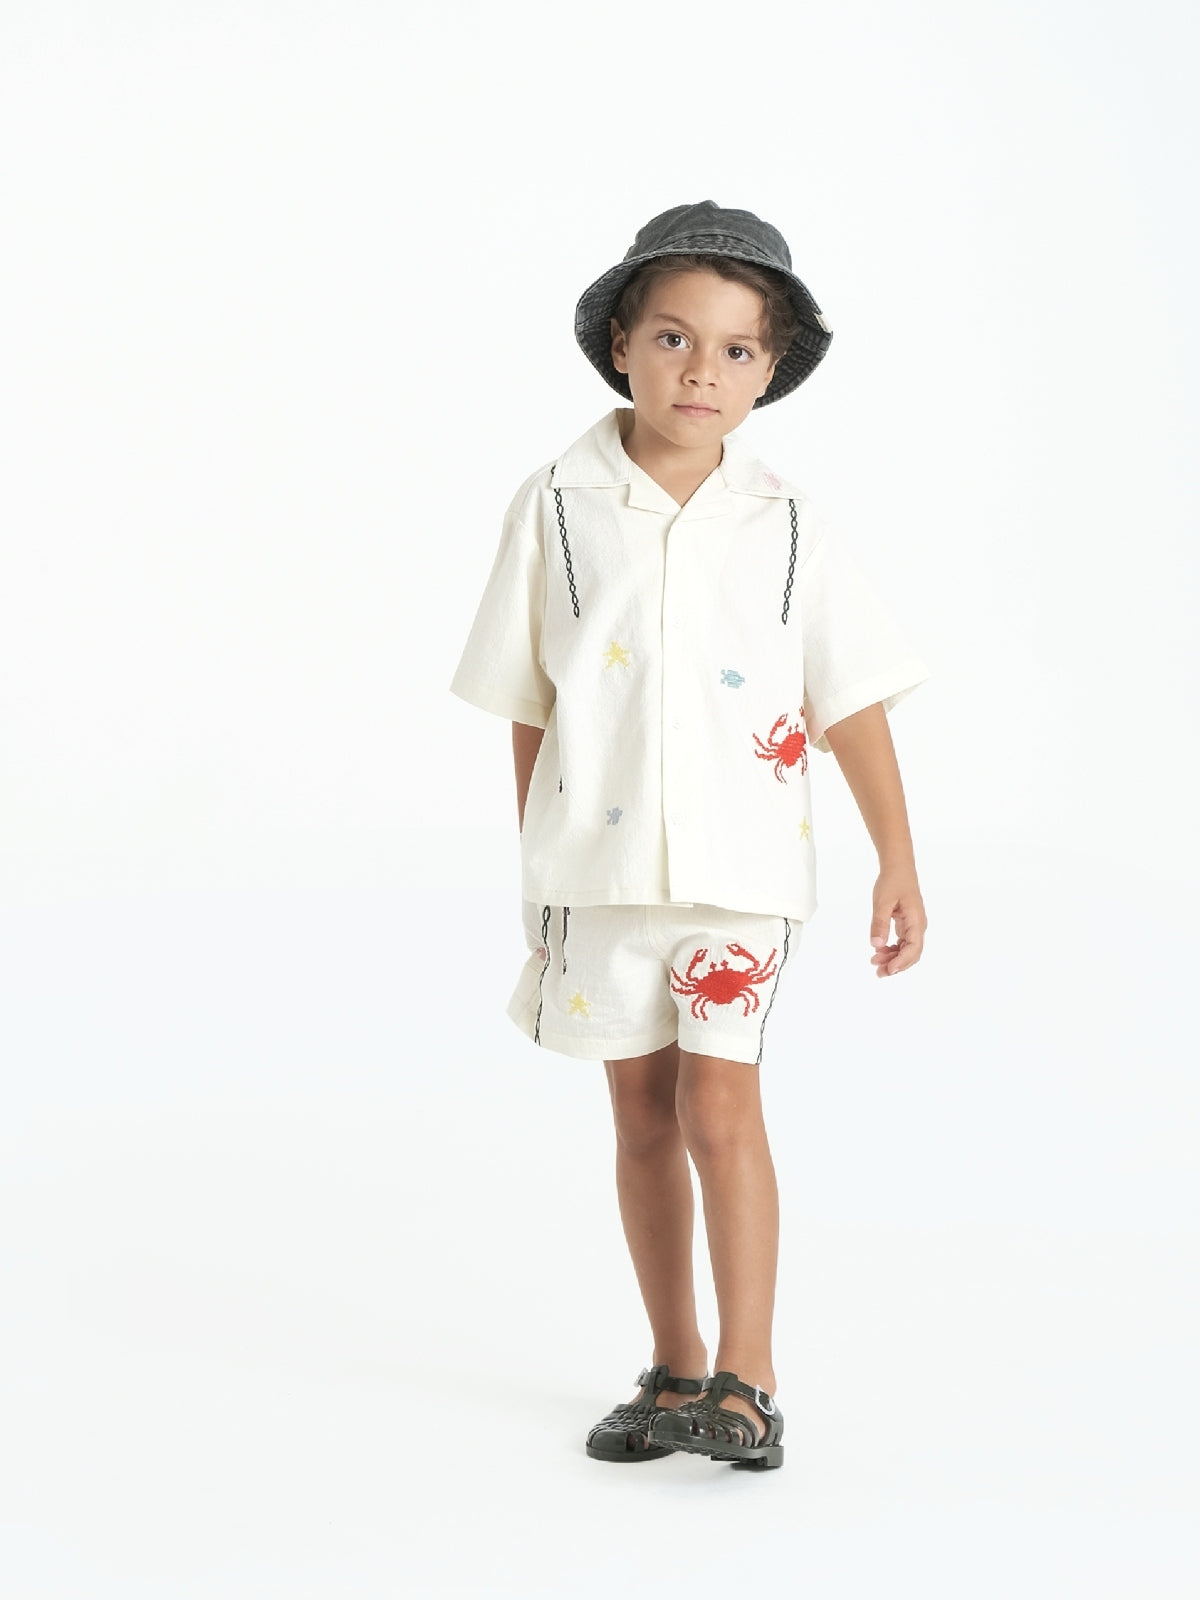 crab and seahorse embroidered set for kids